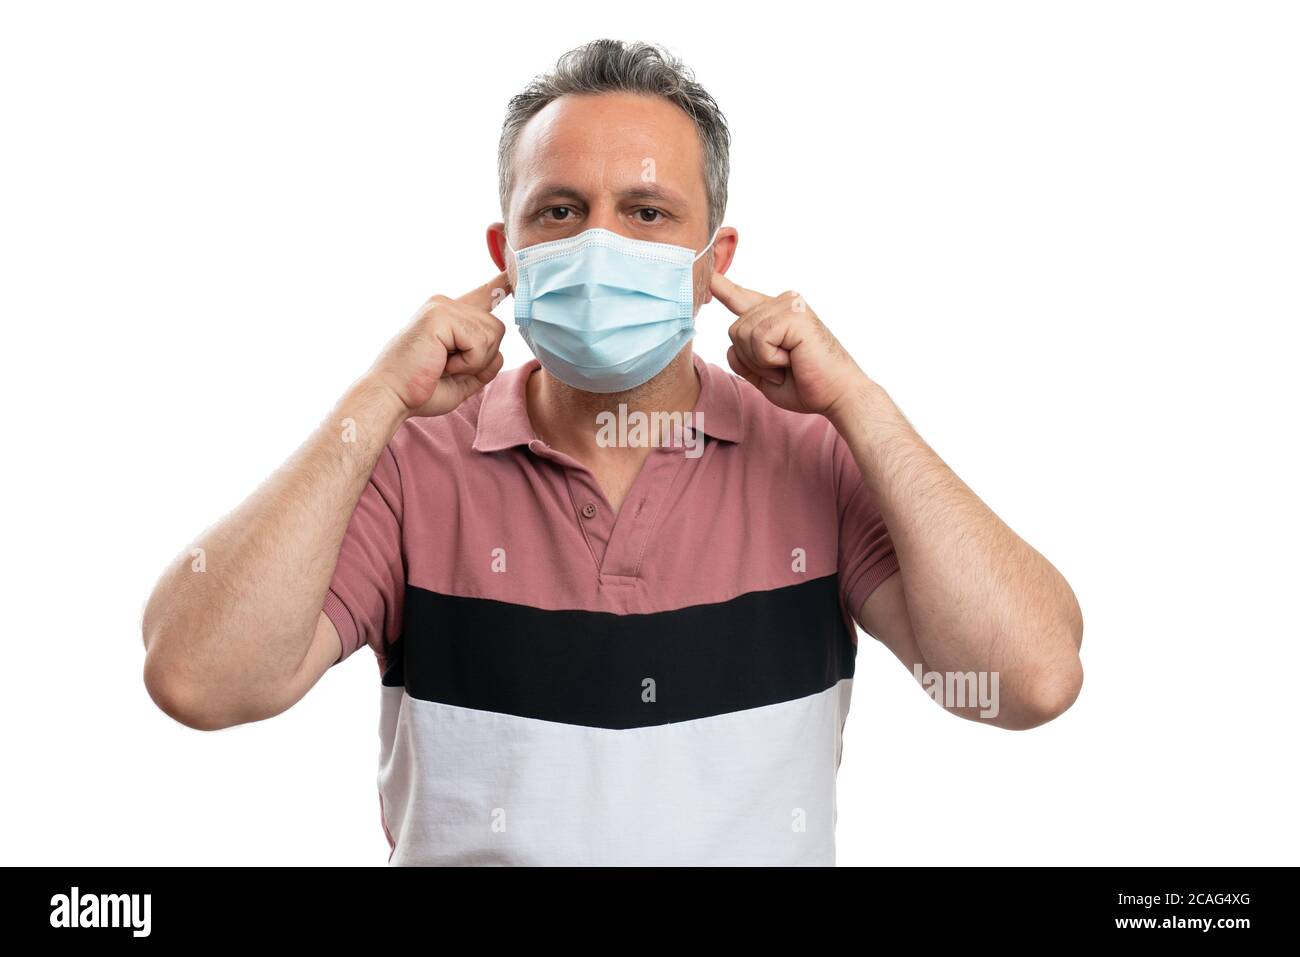 Man having serious expression putting index fingers in ears with medical mask as no hearing gesture covid19 concept isolated on white background Stock Photo